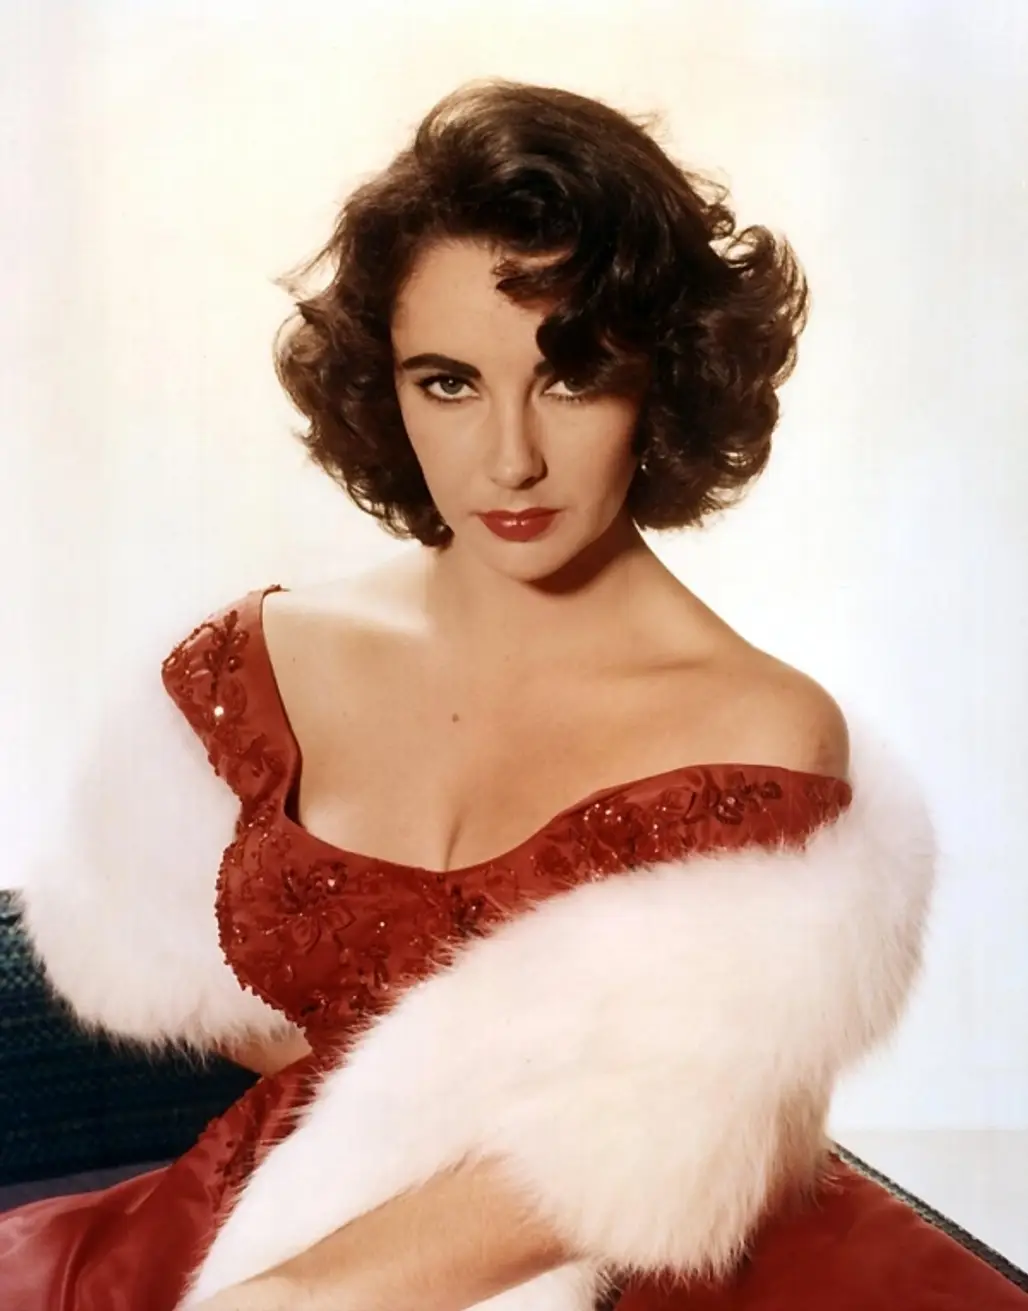 "I Don't like My Voice. I Don't like the Way I Look. I Don't like the Way I Move. I Don't like the Way I Act. I Mean, Period. so, You Know, I Don't like Myself." Elizabeth Taylor